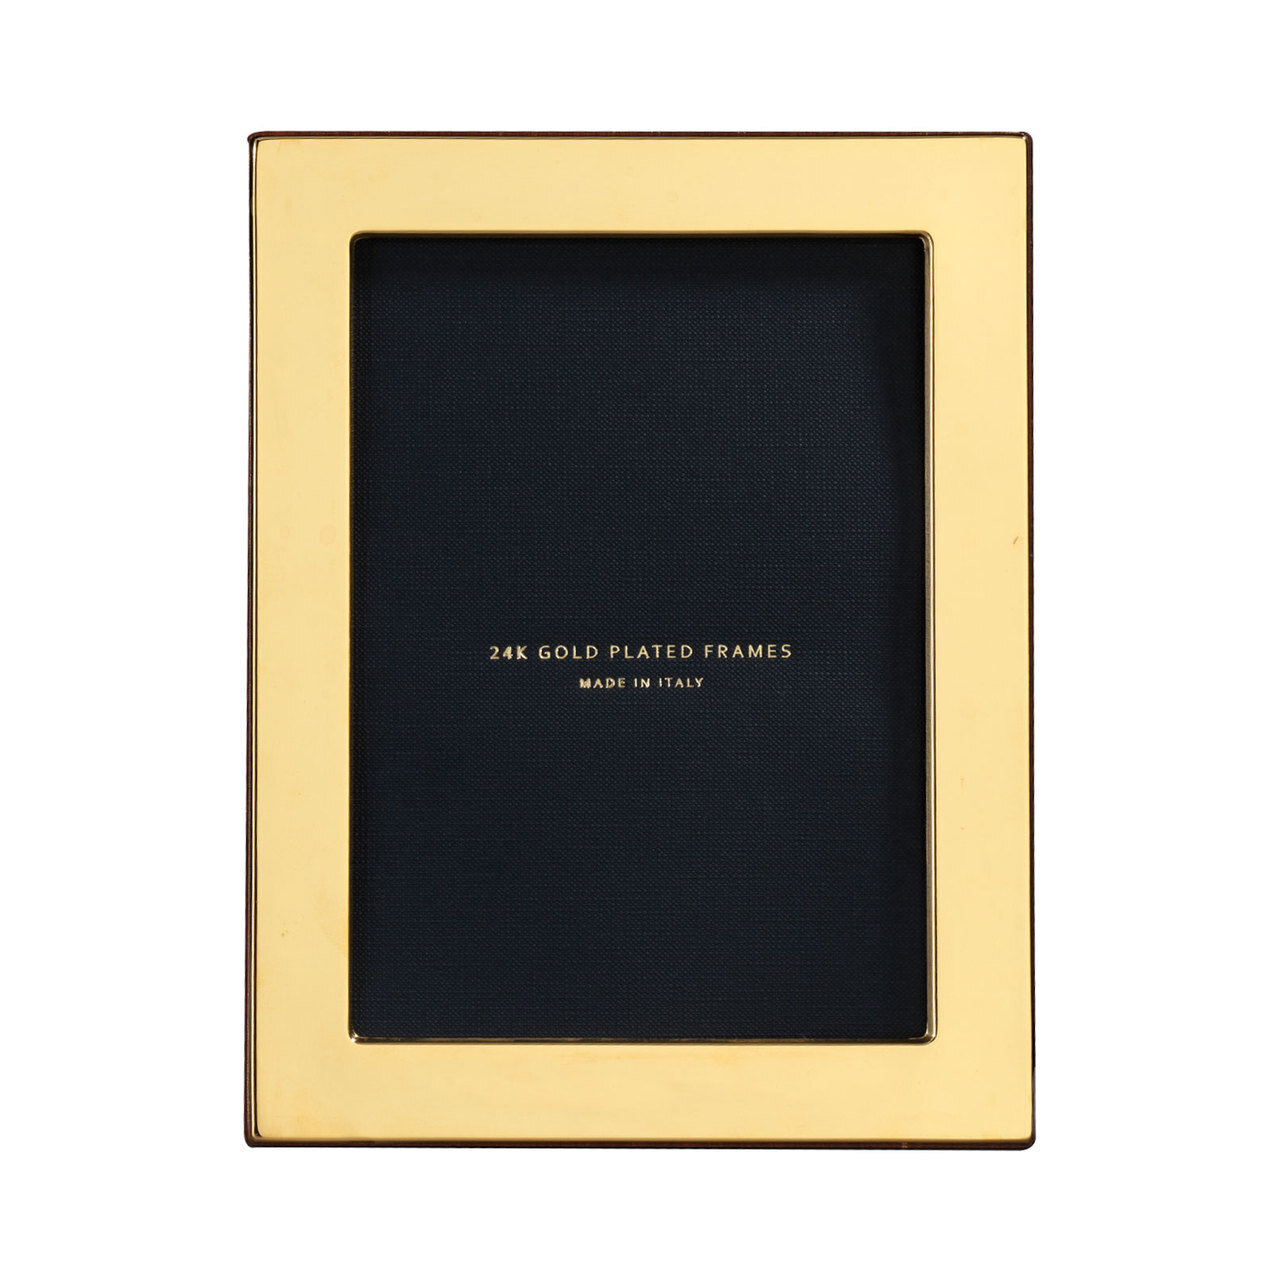 Cunill Plain 5 x 7 Inch Picture Frame - 24k Gold Plated 0.5 Microns